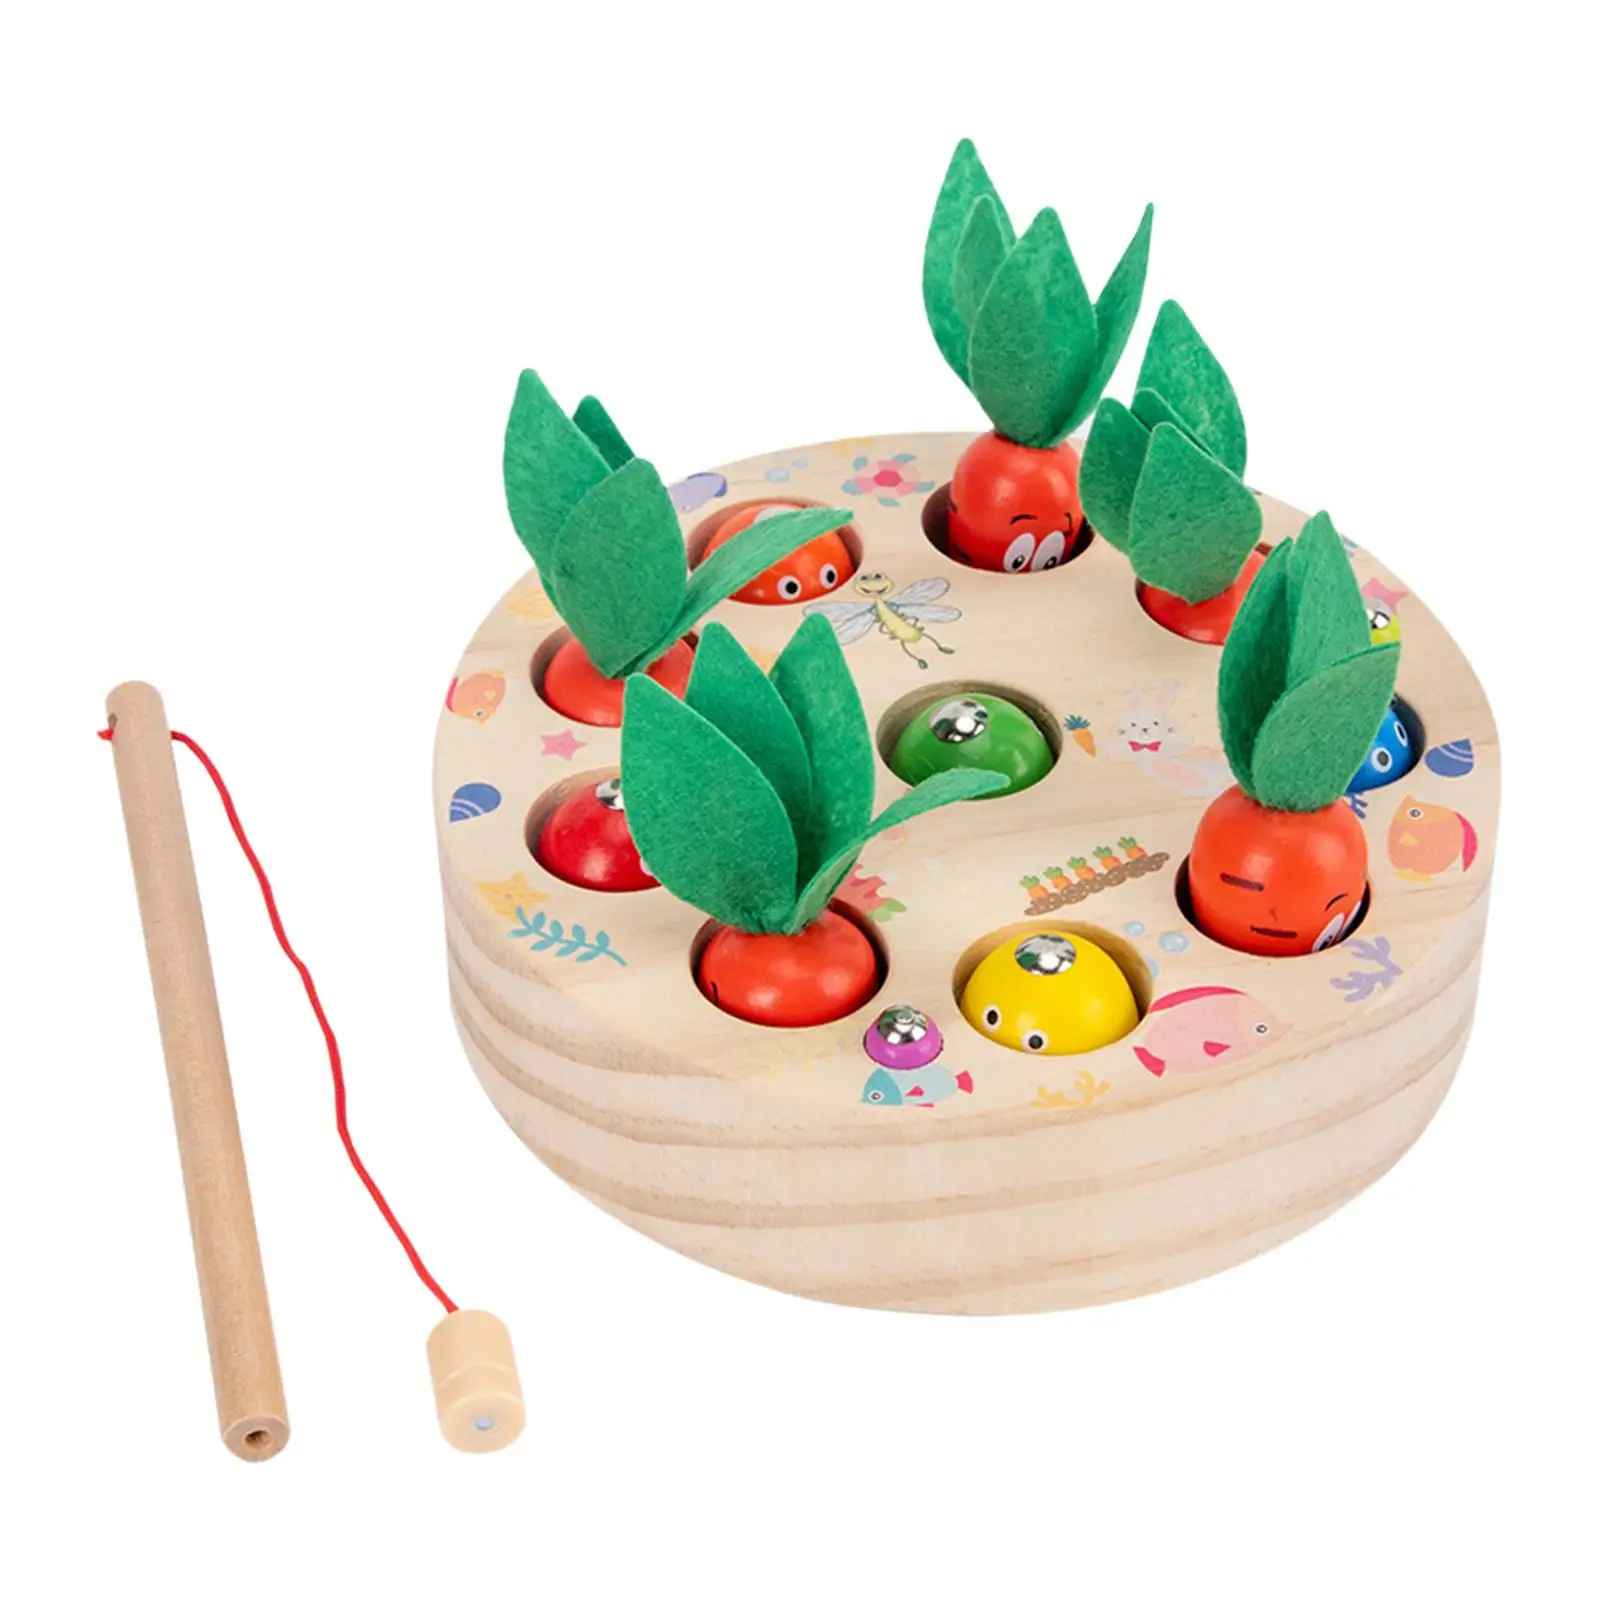 Carrot Harvest Game Fine Motor Skill Learning Toy for Birthday Activity